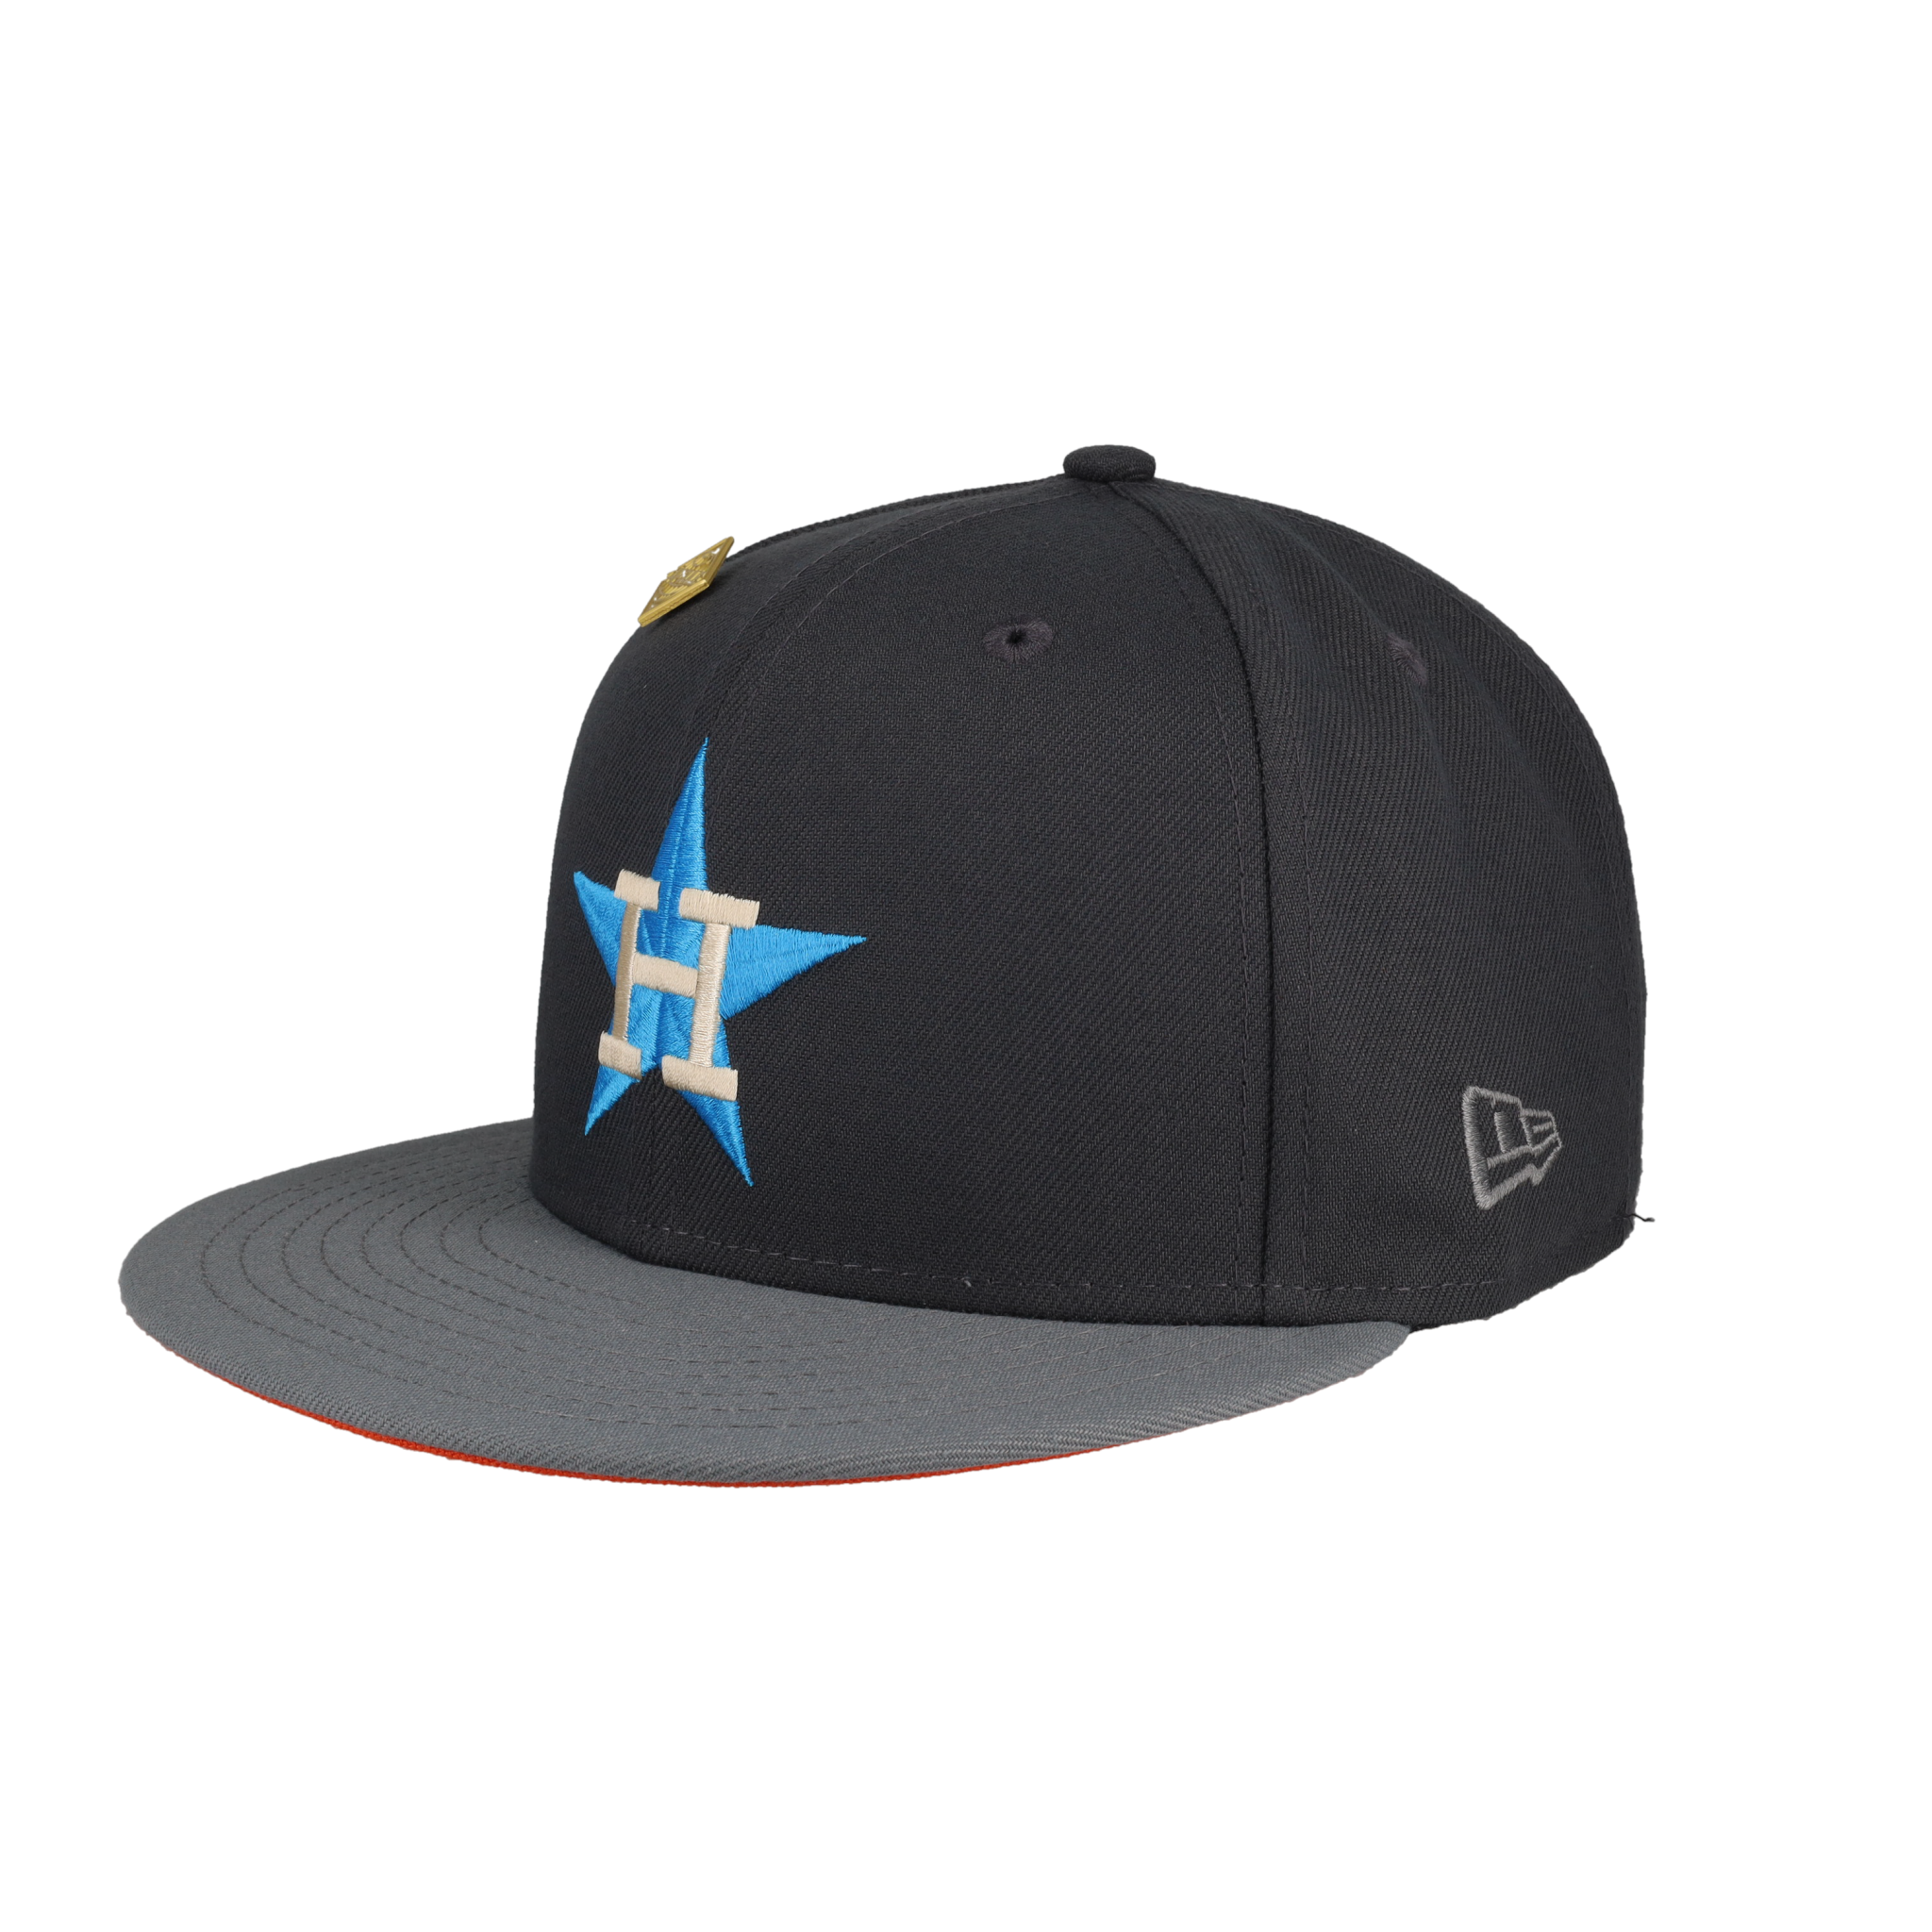 New Era Houston Astros Capsule Vintage Collection 1986 All Star